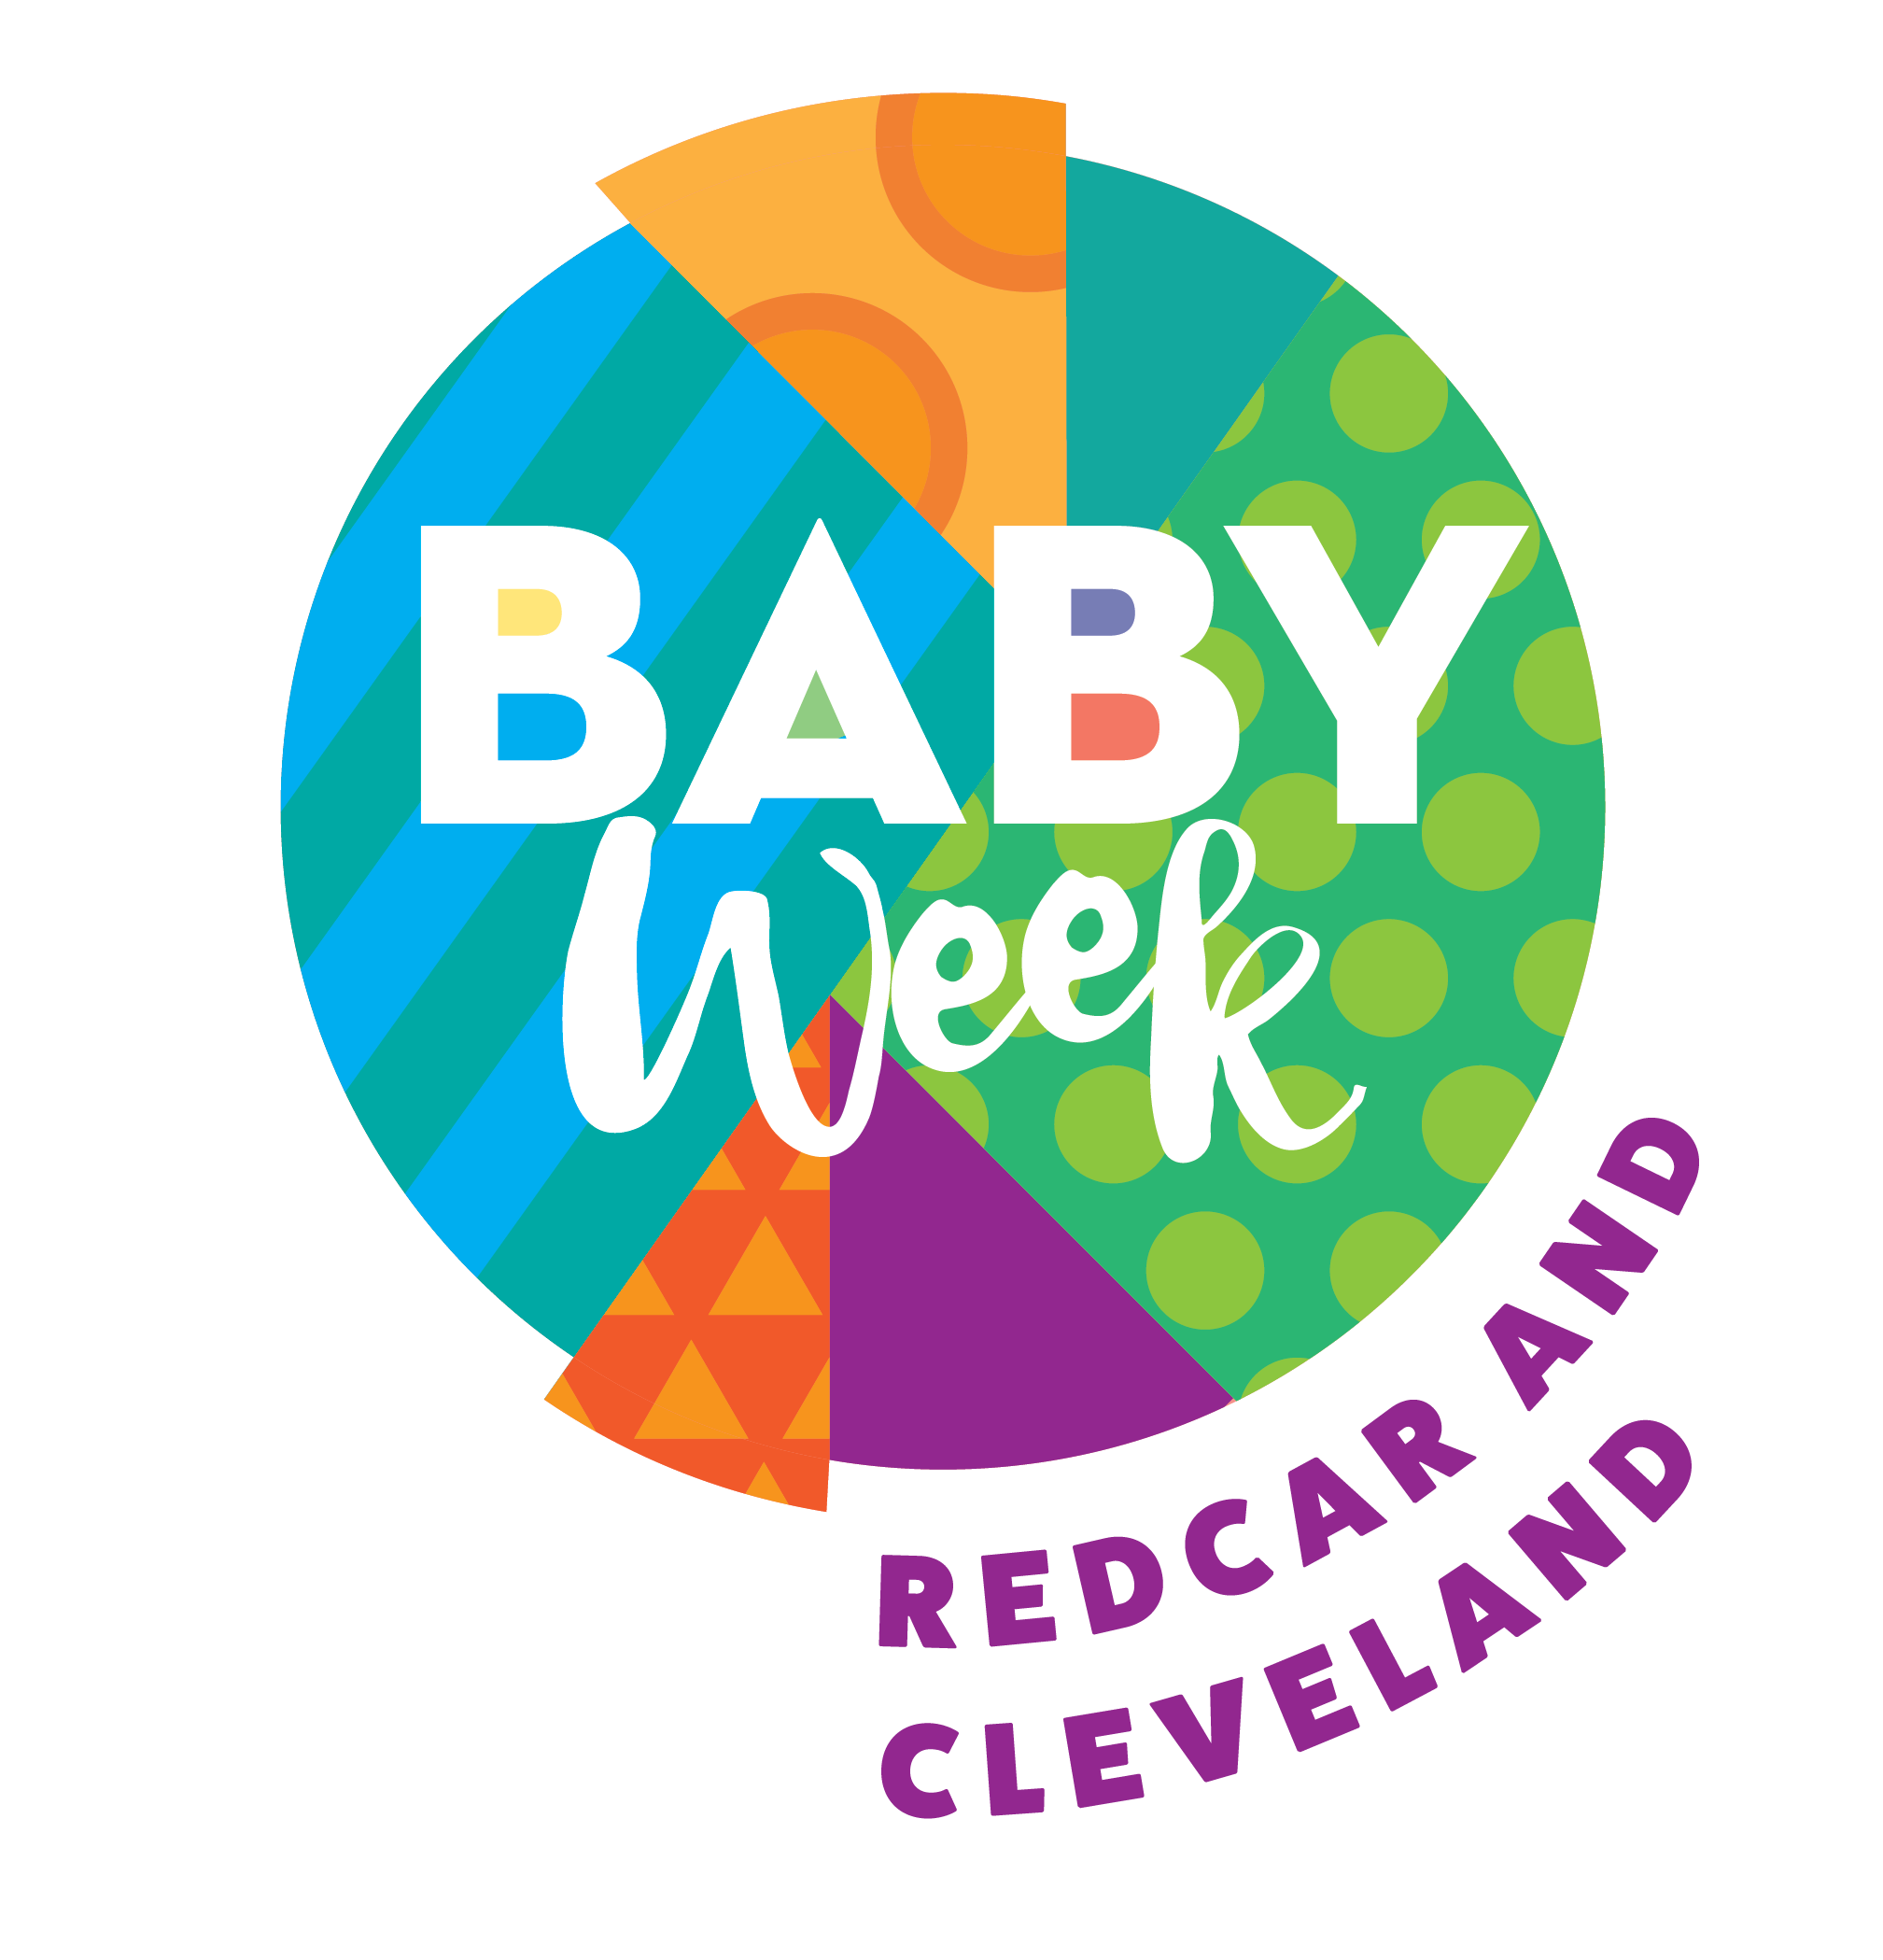 redcarr and cleveland babyweek